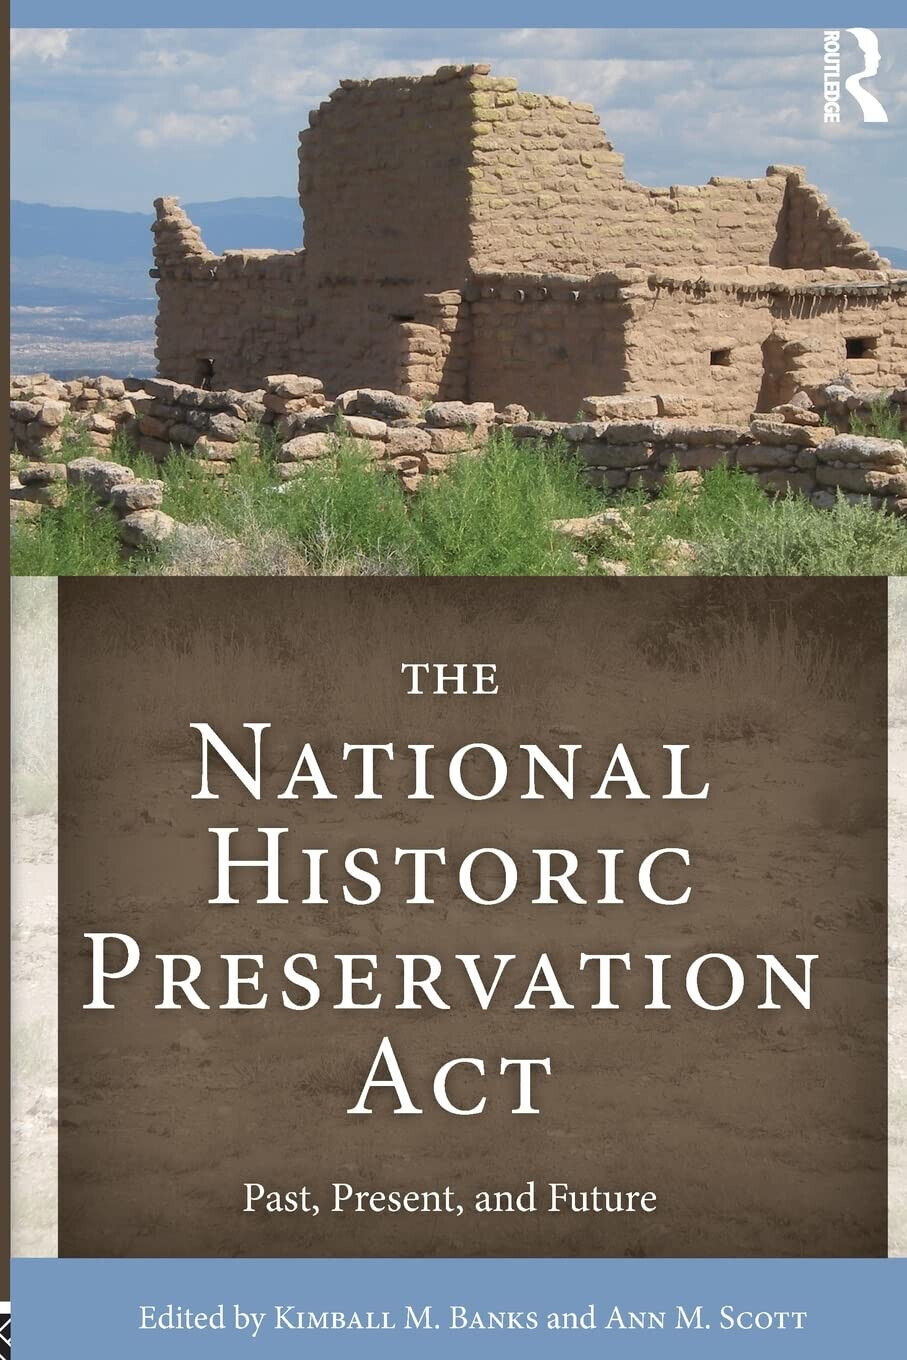 The National Historic Preservation Act - Kimball M. Banks - Routledge, 2016 libro usato